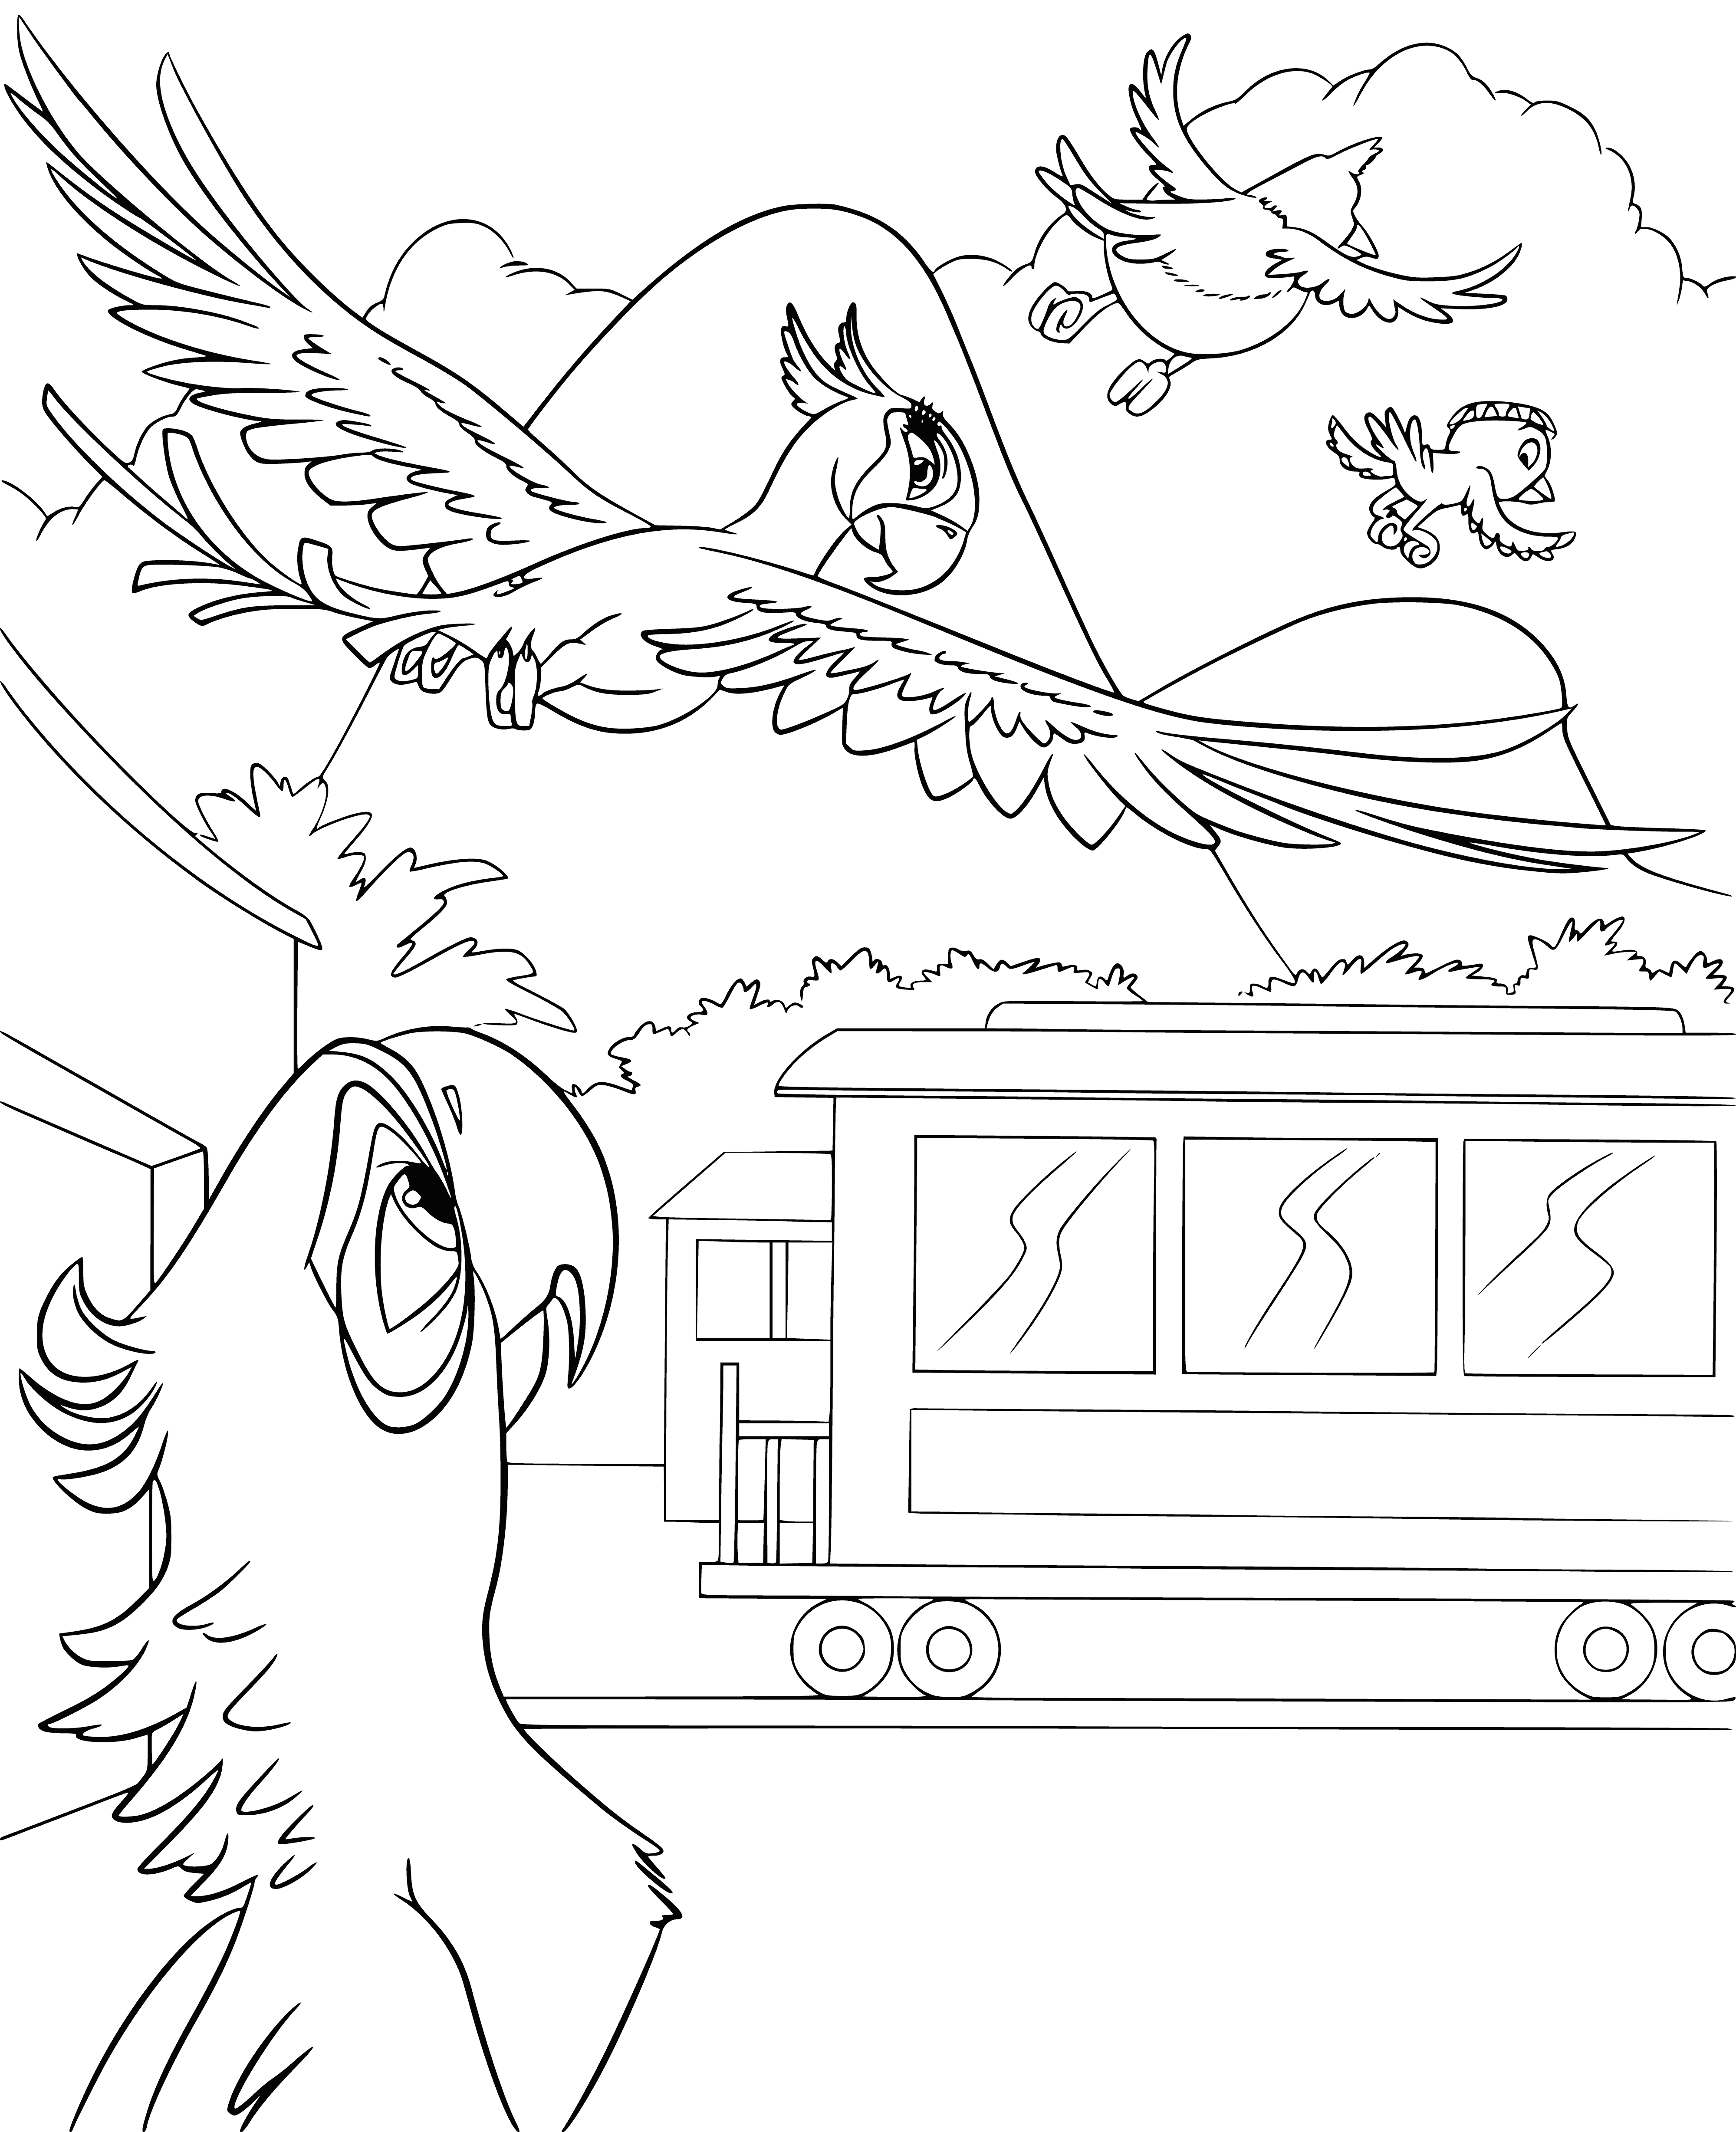 coloring page: Bird carries pearl away in a rainbow-colored blur.